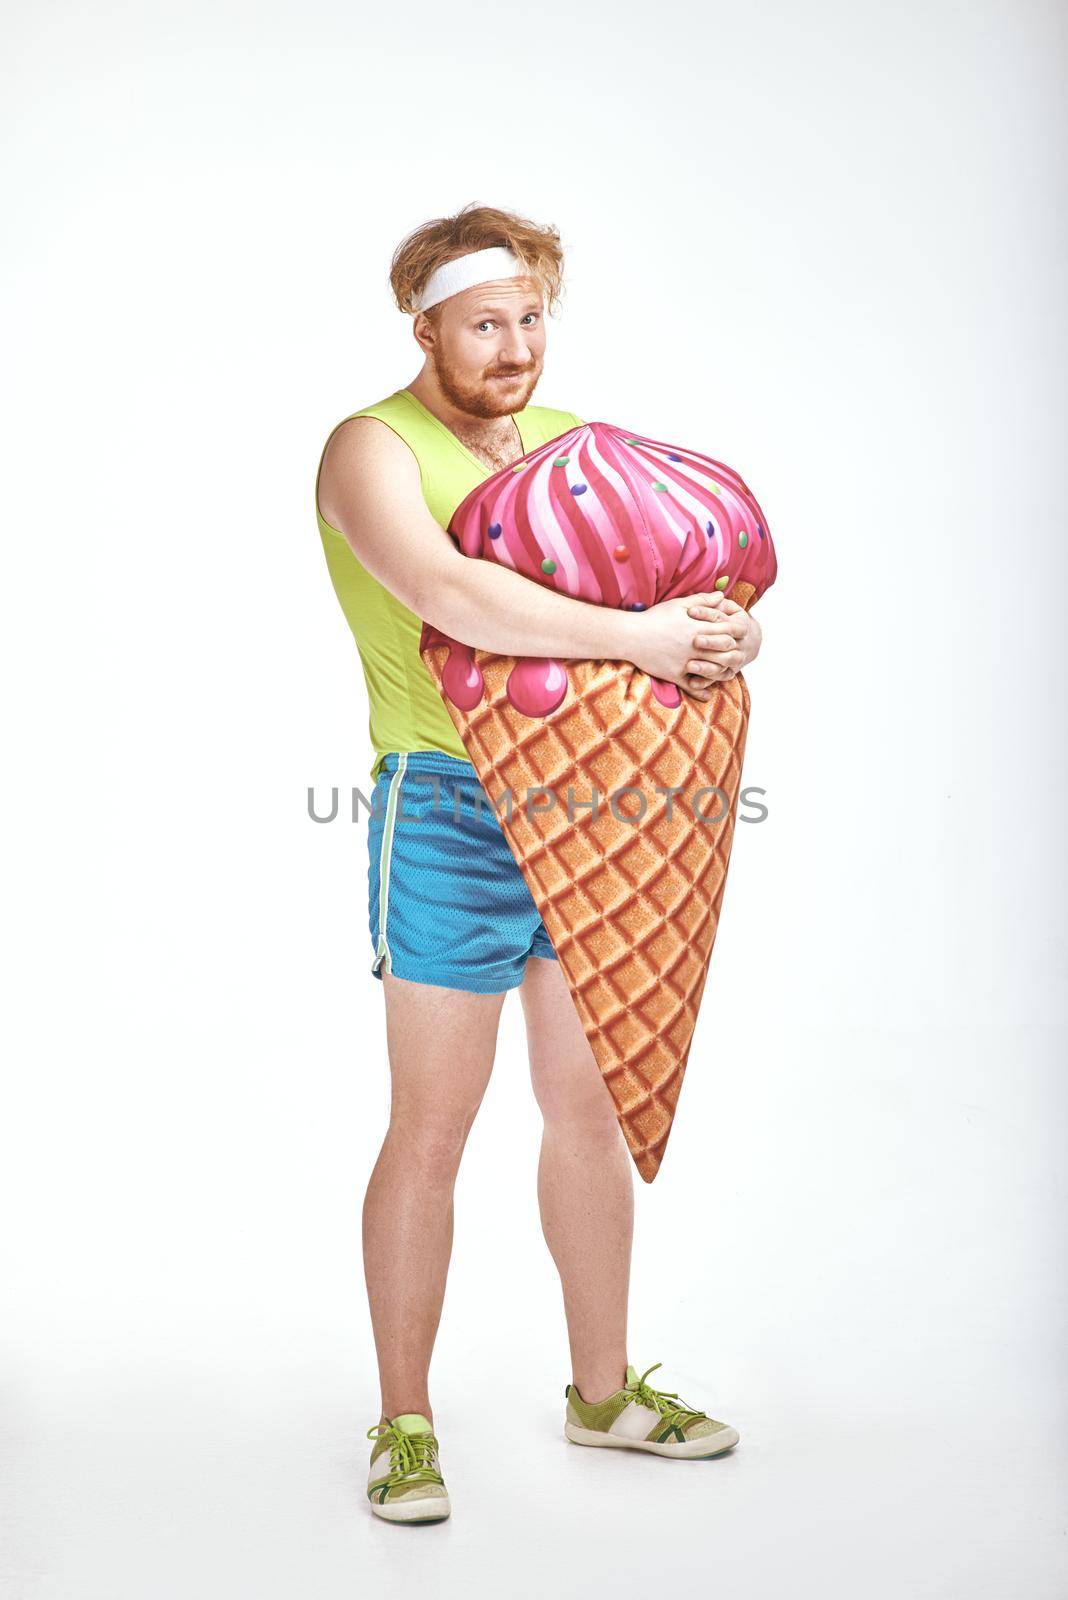 Funny picture of red haired, bearded, plump man on white background. Man holding a big ice cream